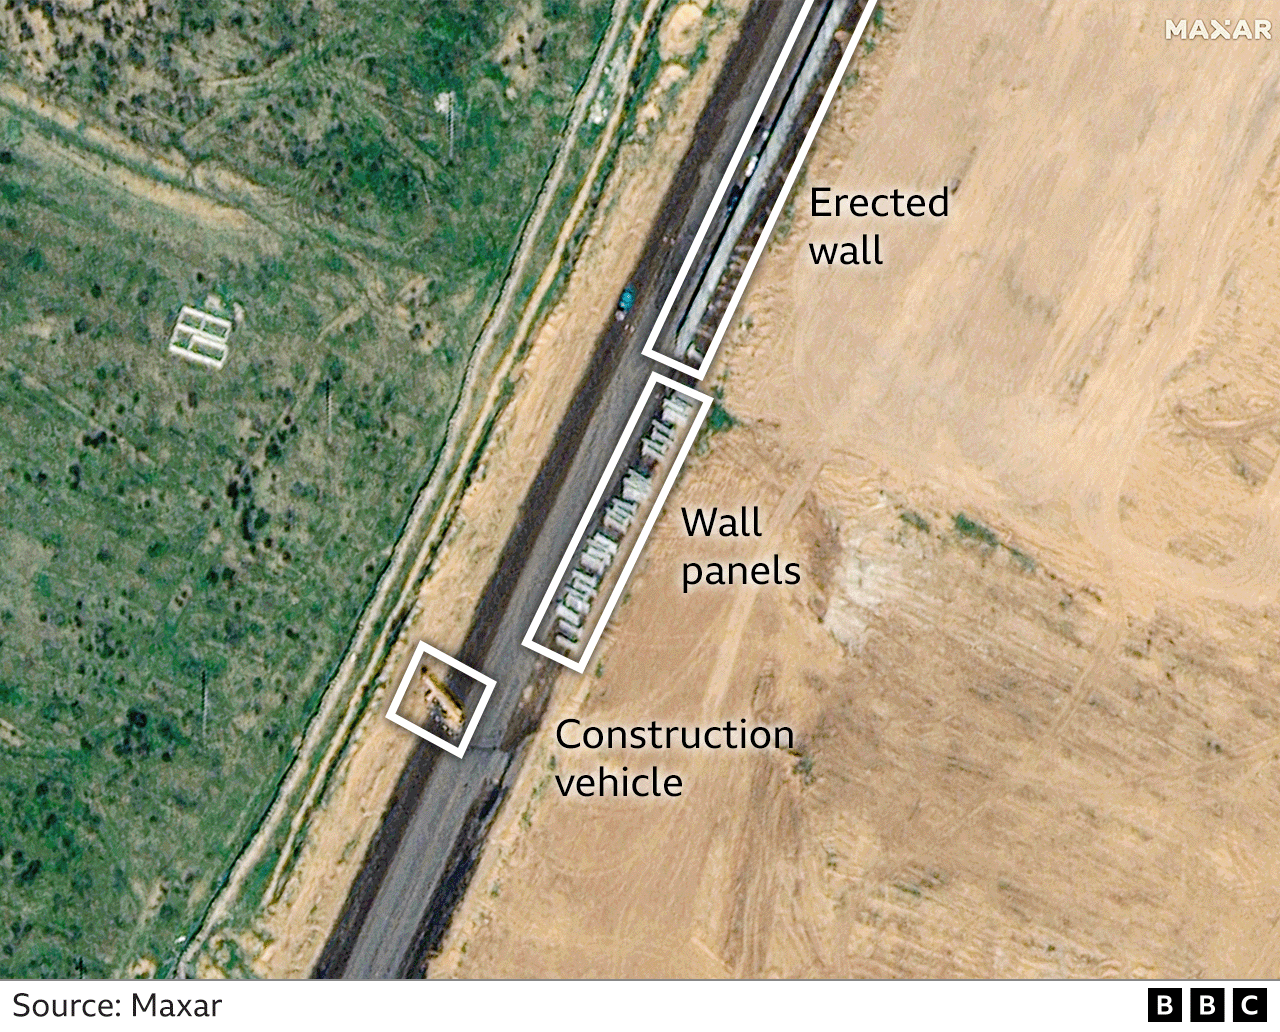 Erected wall and building materials for wall panels pictured alongside a construction vehicle on Egypt's side of the border with Gaza on 15 February